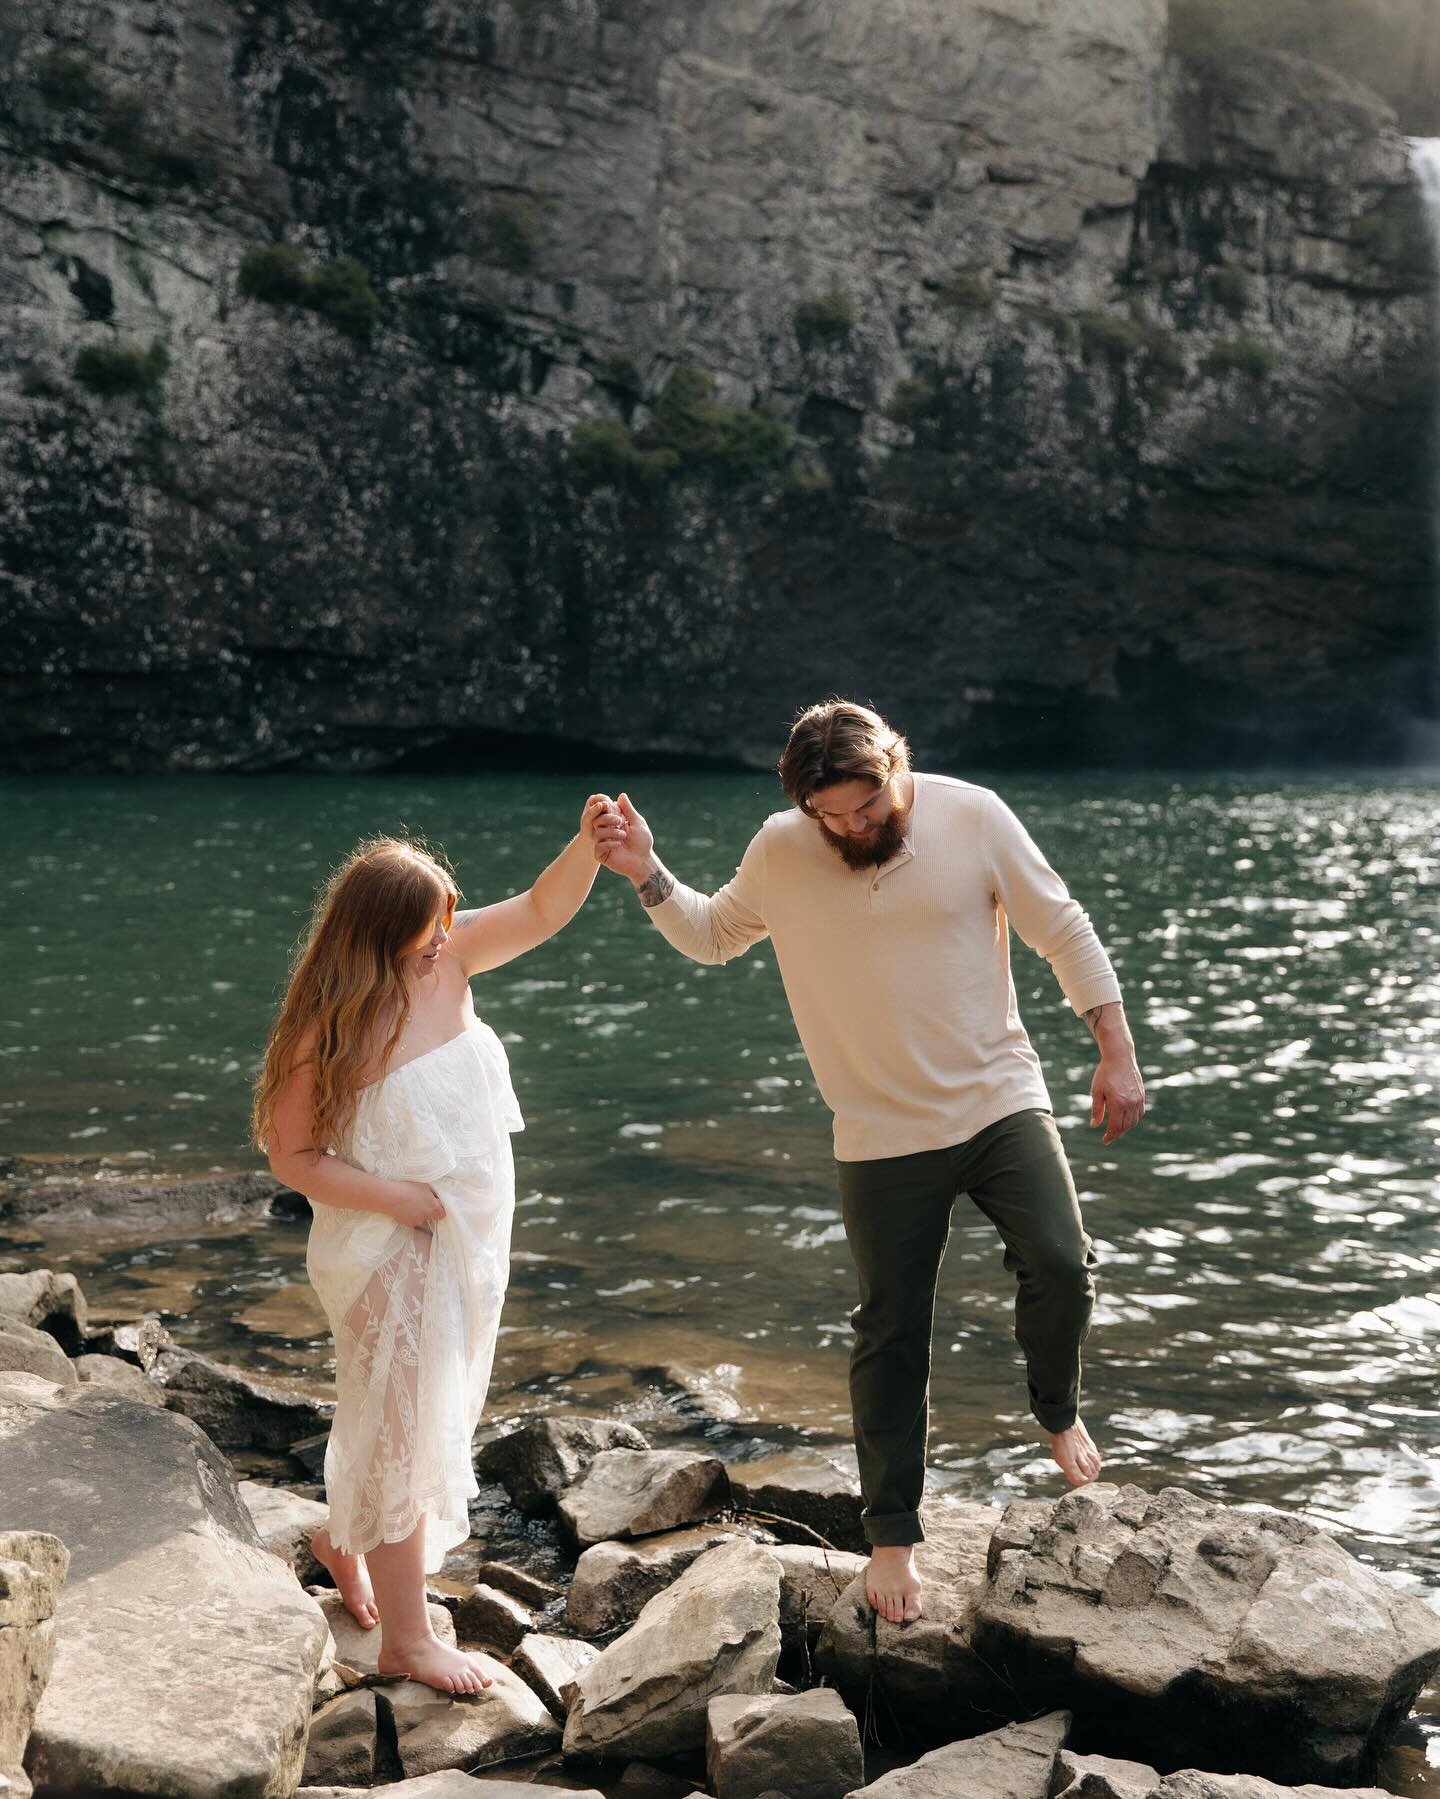 I have SO MUCH left to share from March. This session at Fall Creek Falls could not have been more perfect. Laura and Nathan are from Indiana and made the trek down here for engagements and I&rsquo;m so glad they did!

After the hike down to the fall